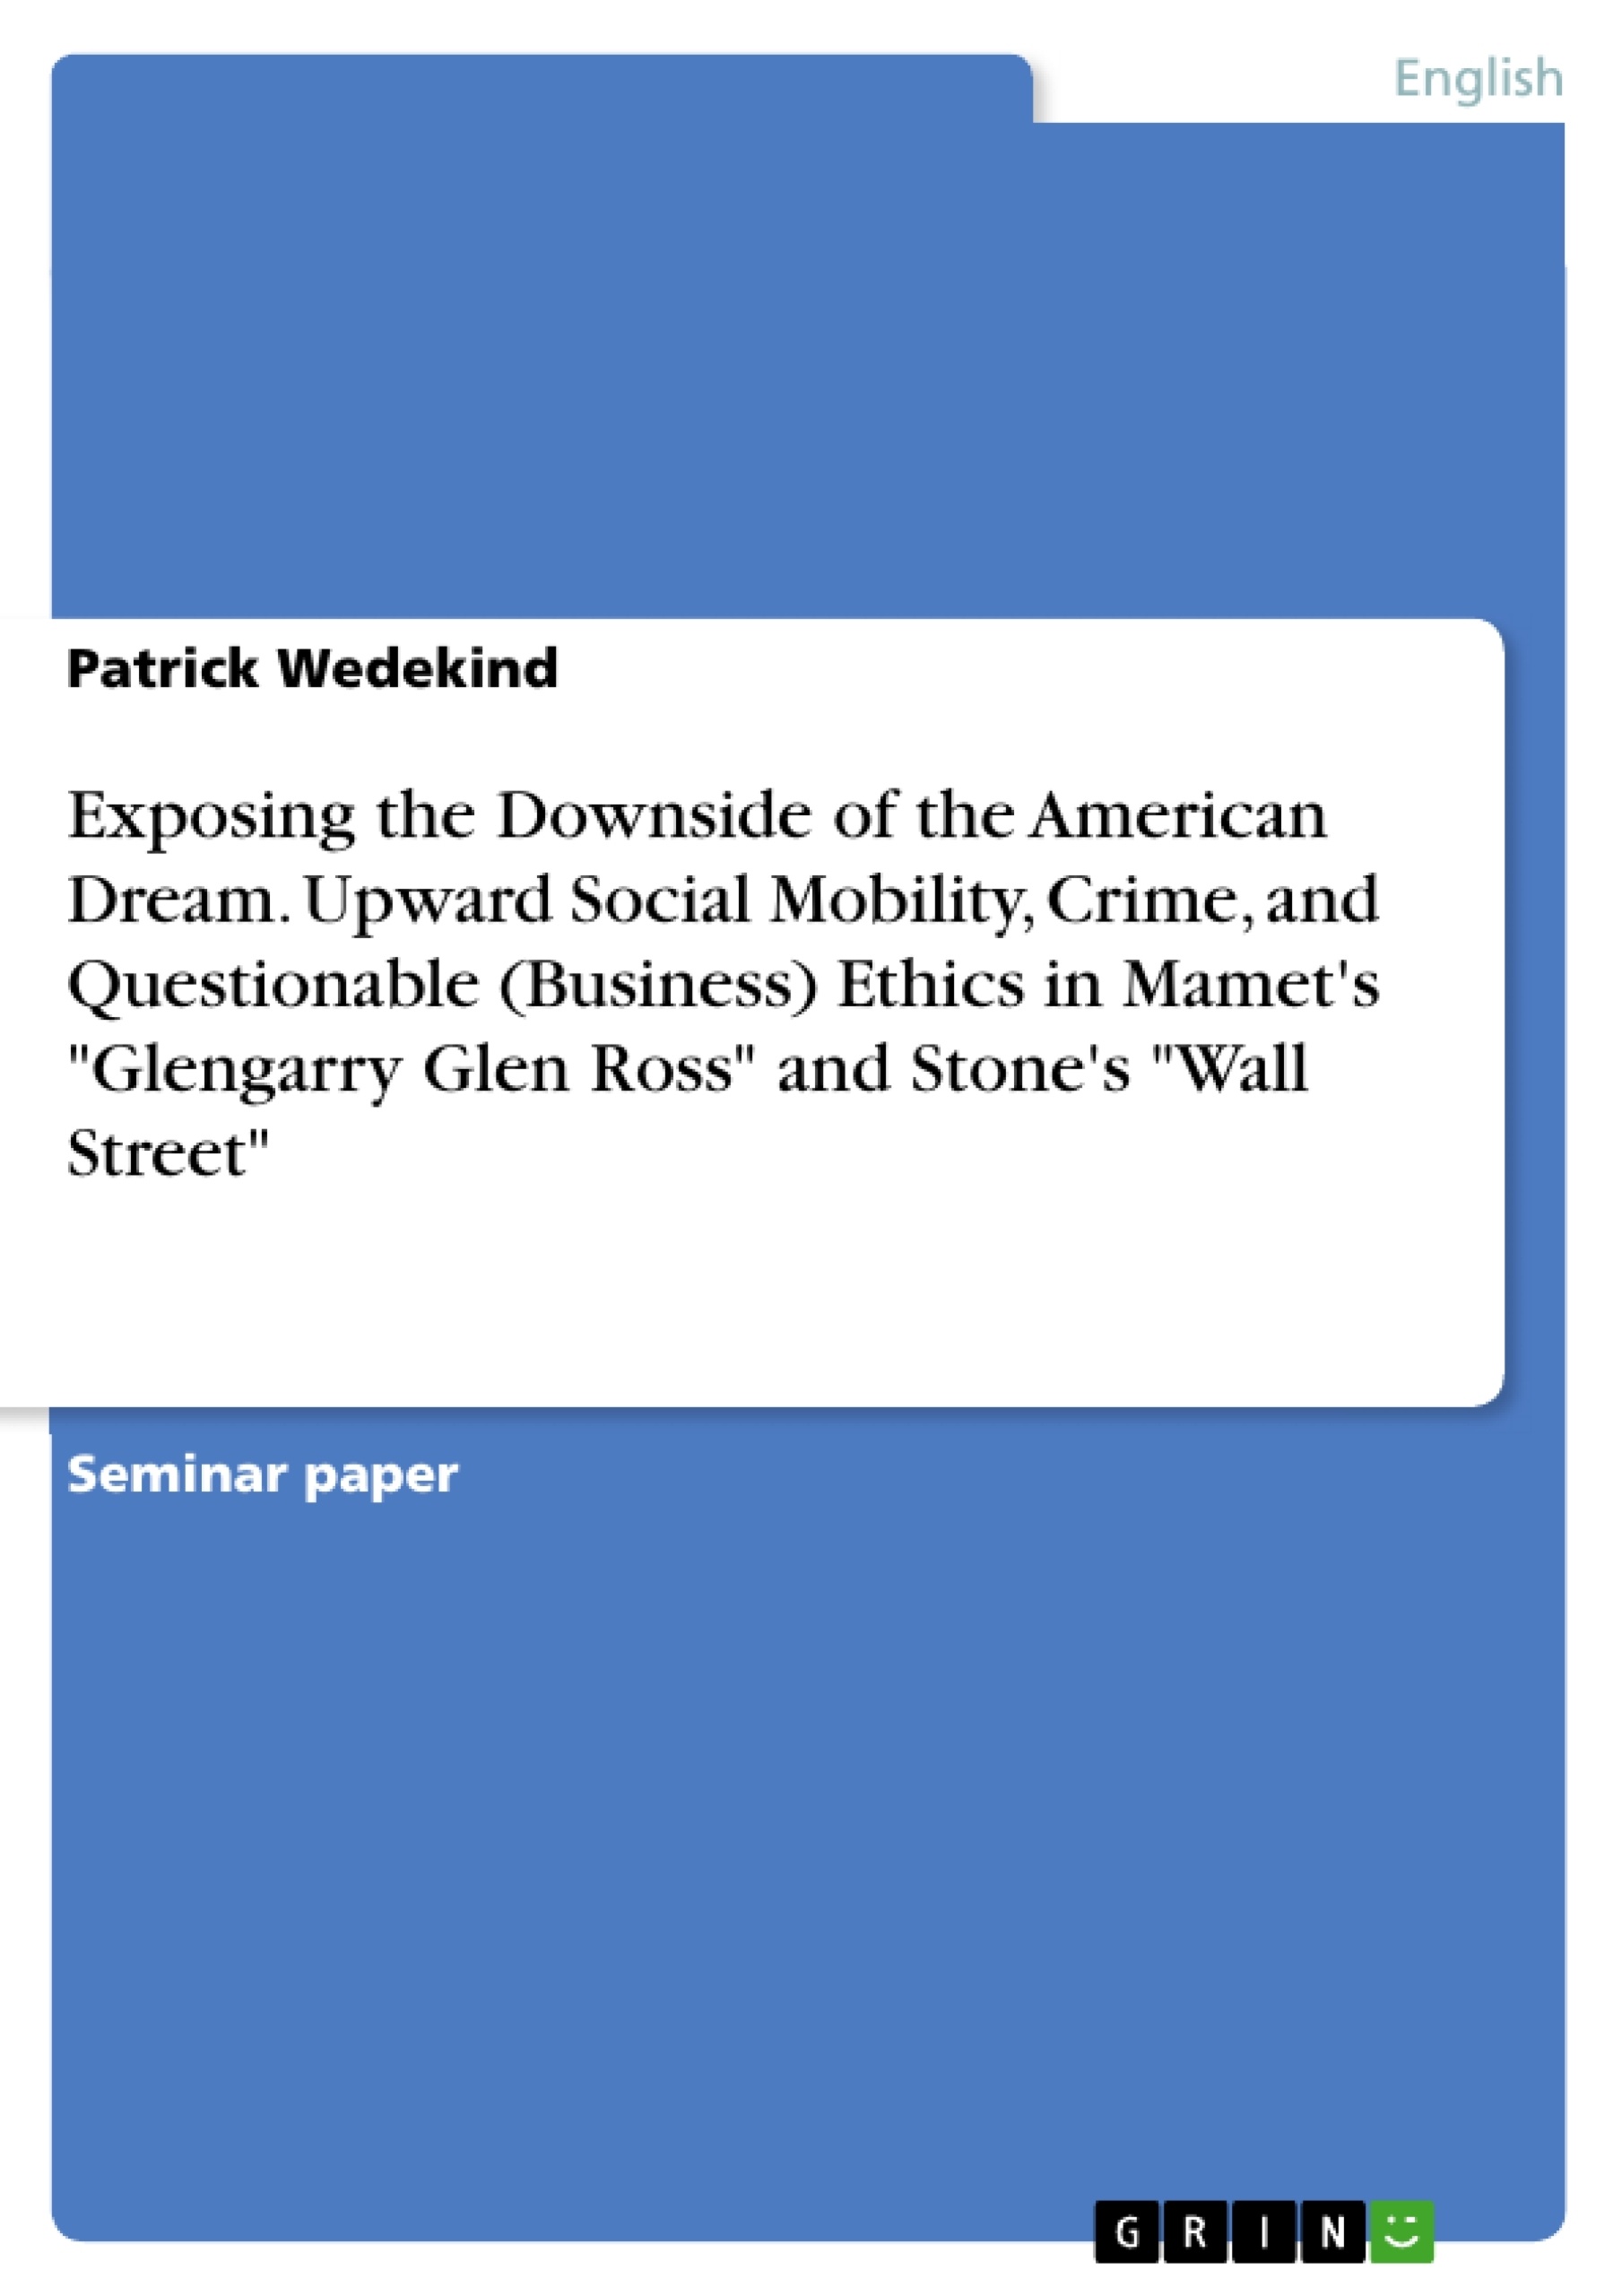 Title: Exposing the Downside of the American Dream. Upward Social Mobility, Crime, and Questionable (Business) Ethics in Mamet's "Glengarry Glen Ross" and Stone's "Wall Street"